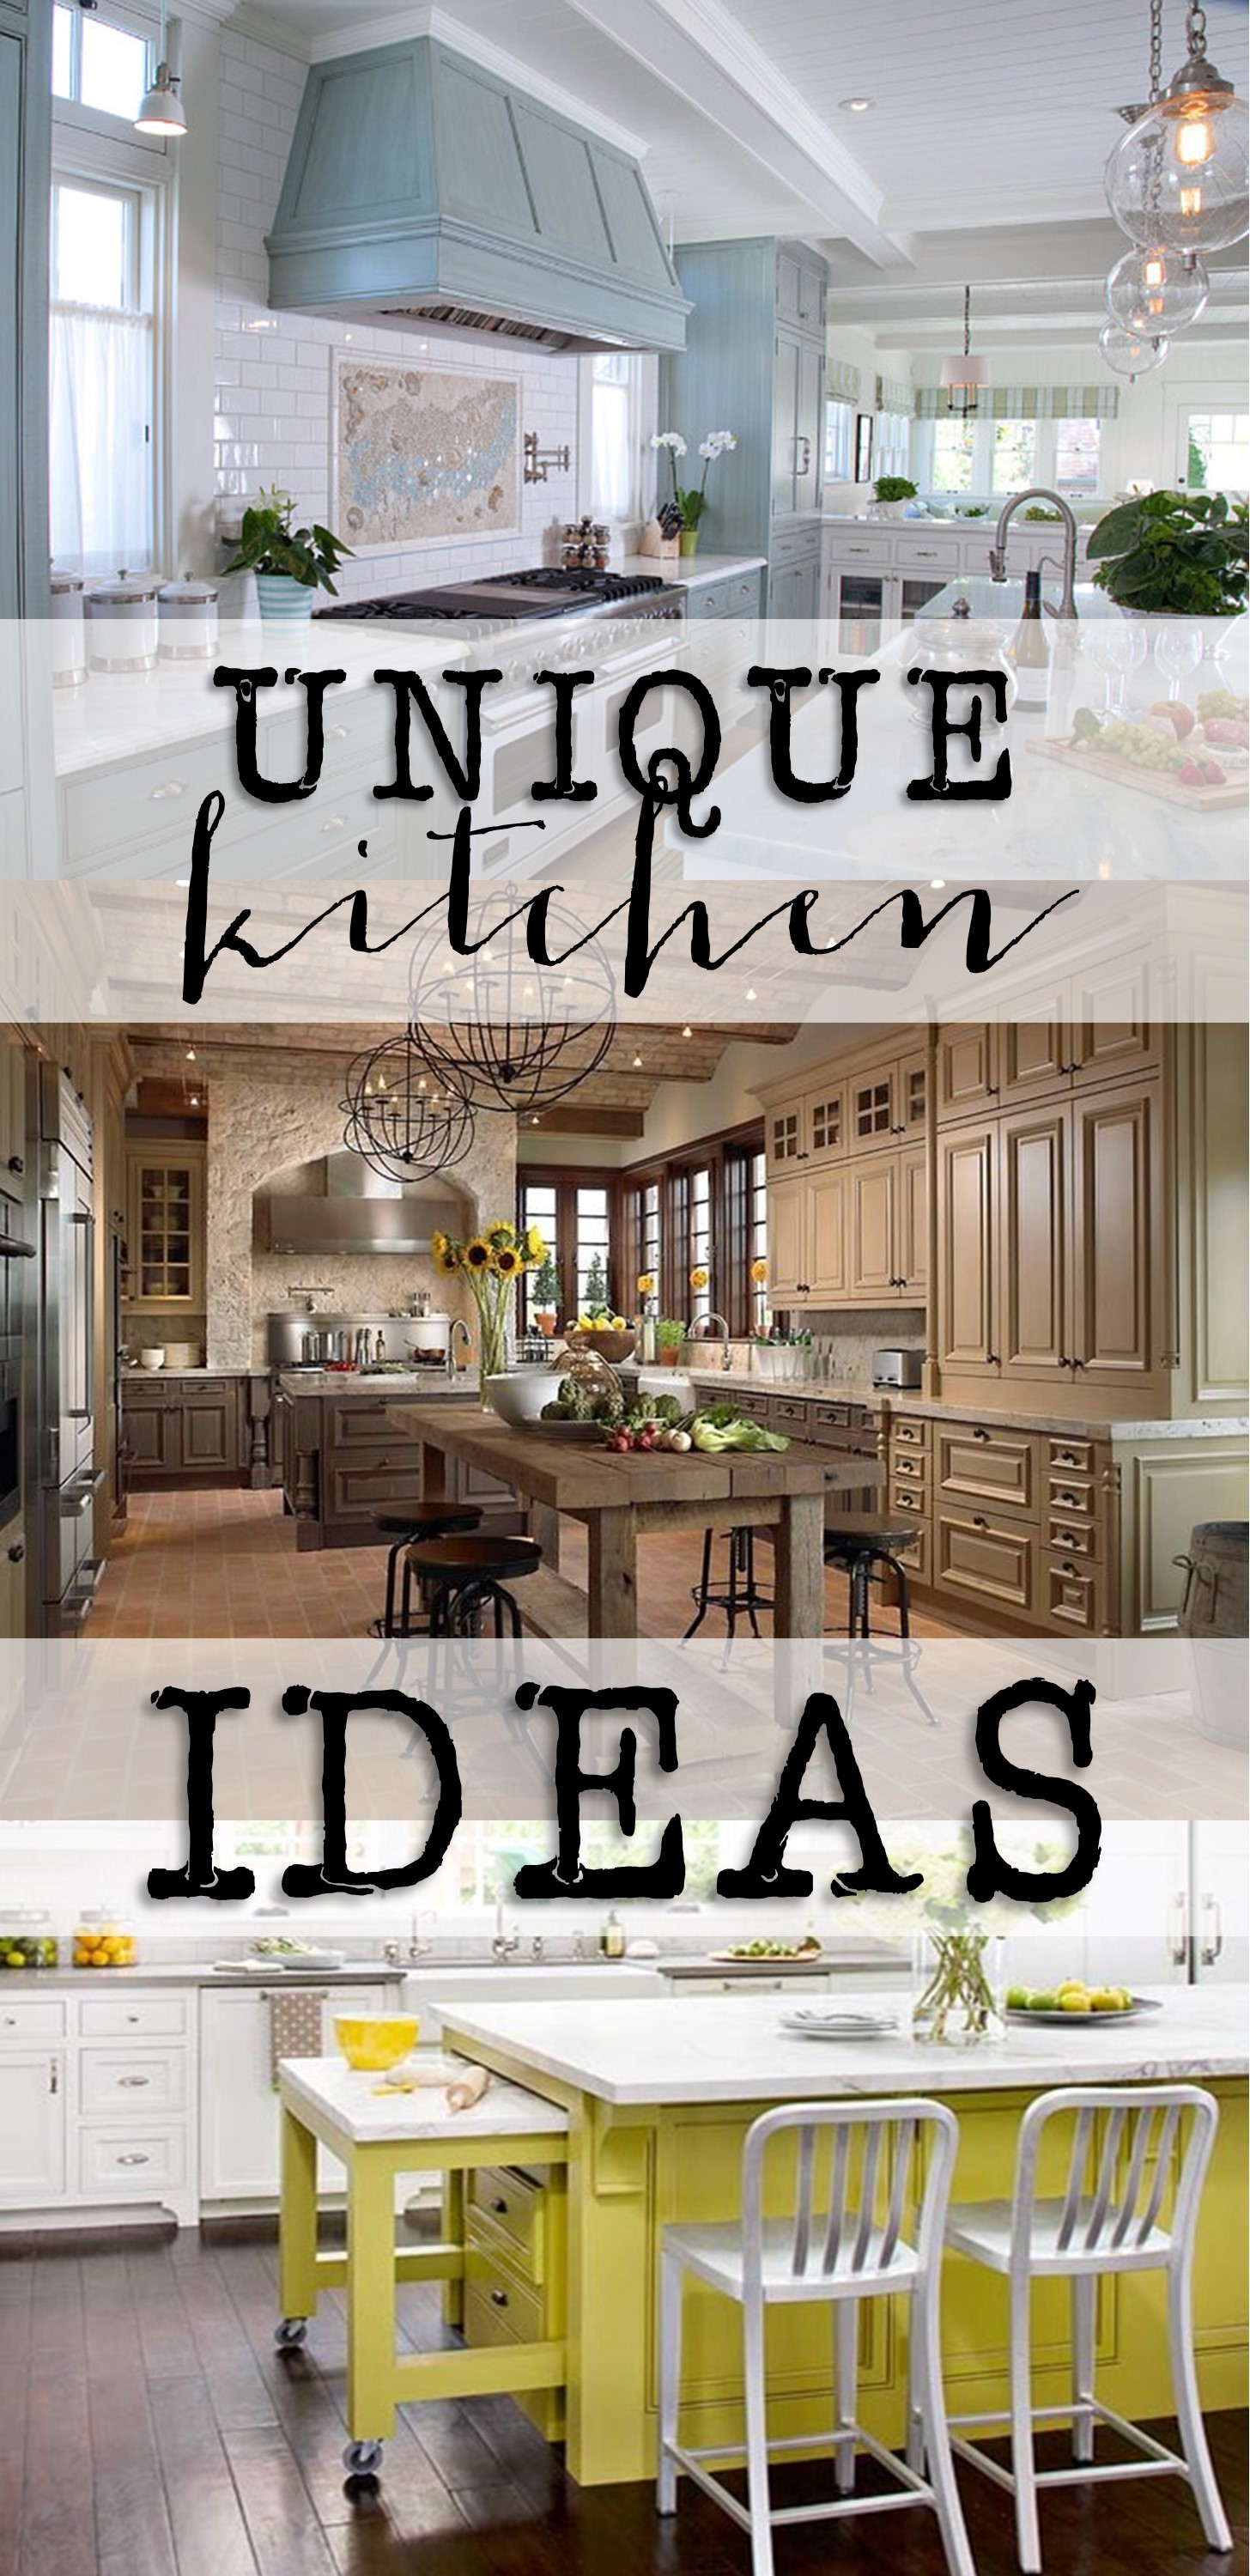 FRIDAY FAVORITES: unique kitchen ideas - House of Hargrove